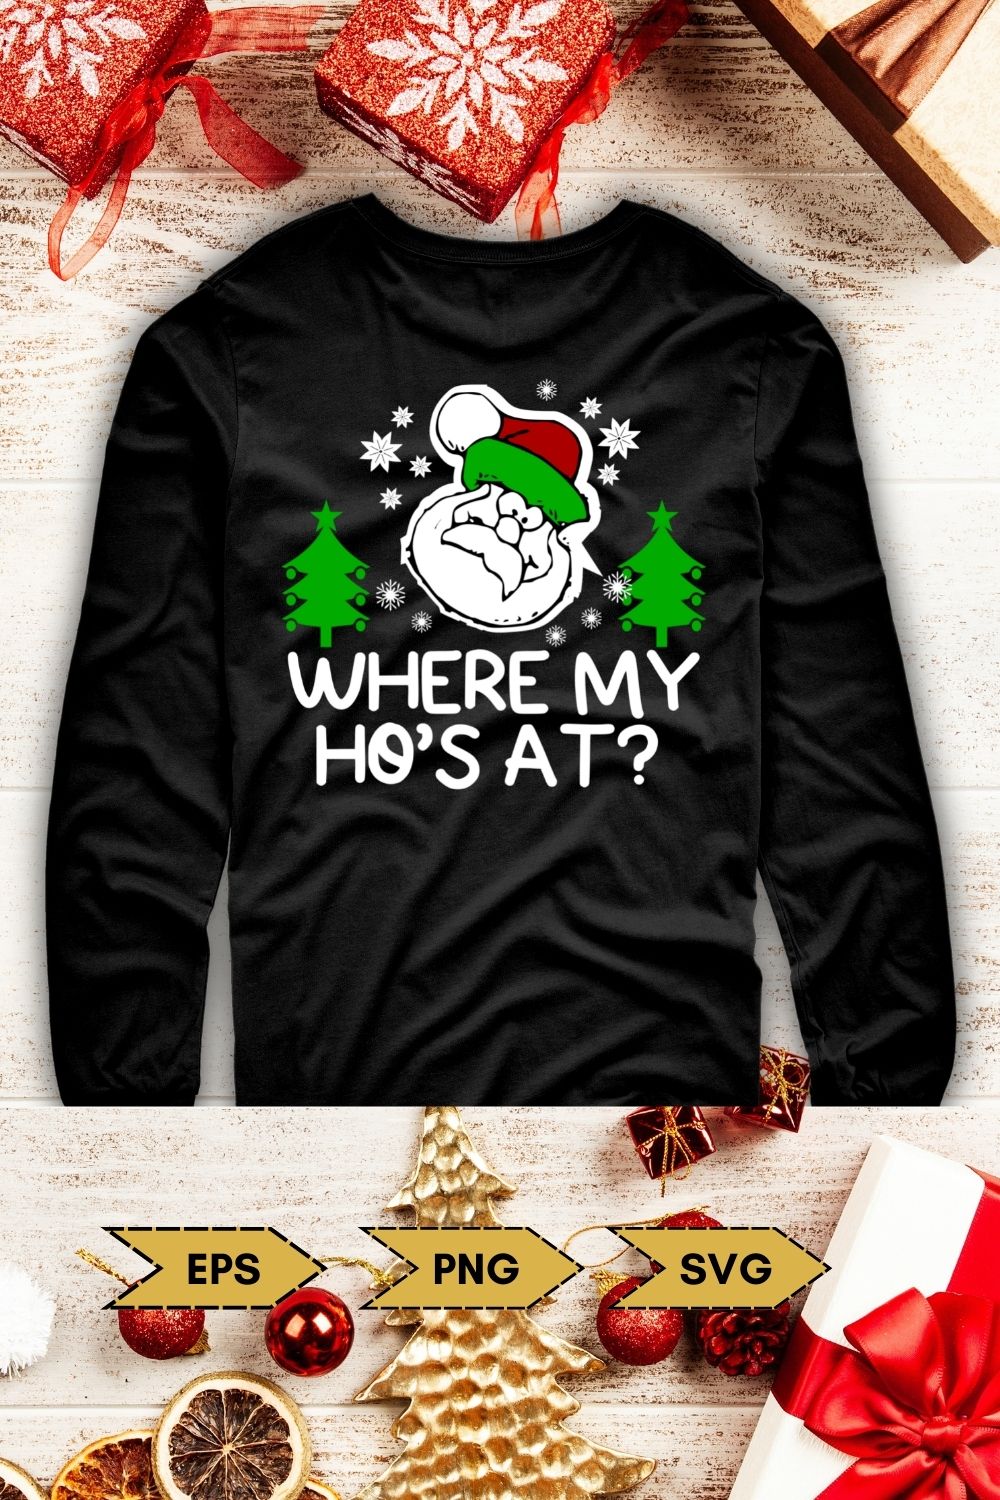 Image of a black sweatshirt with a unique print on the Christmas theme.